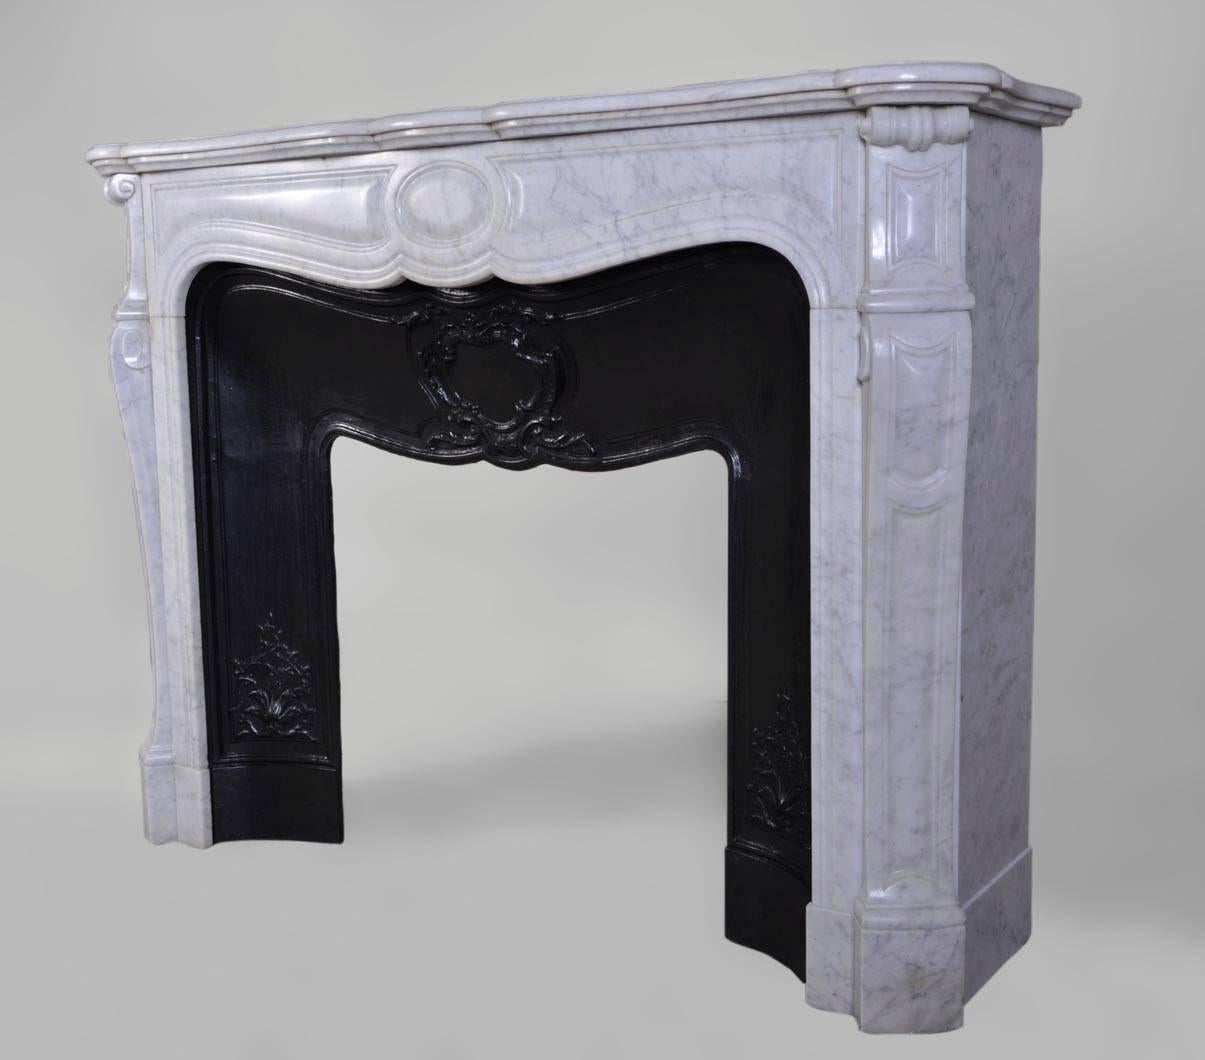 Carved Antique Pompadour Style Fireplace, White Carrara Marble with Cast Iron Insert